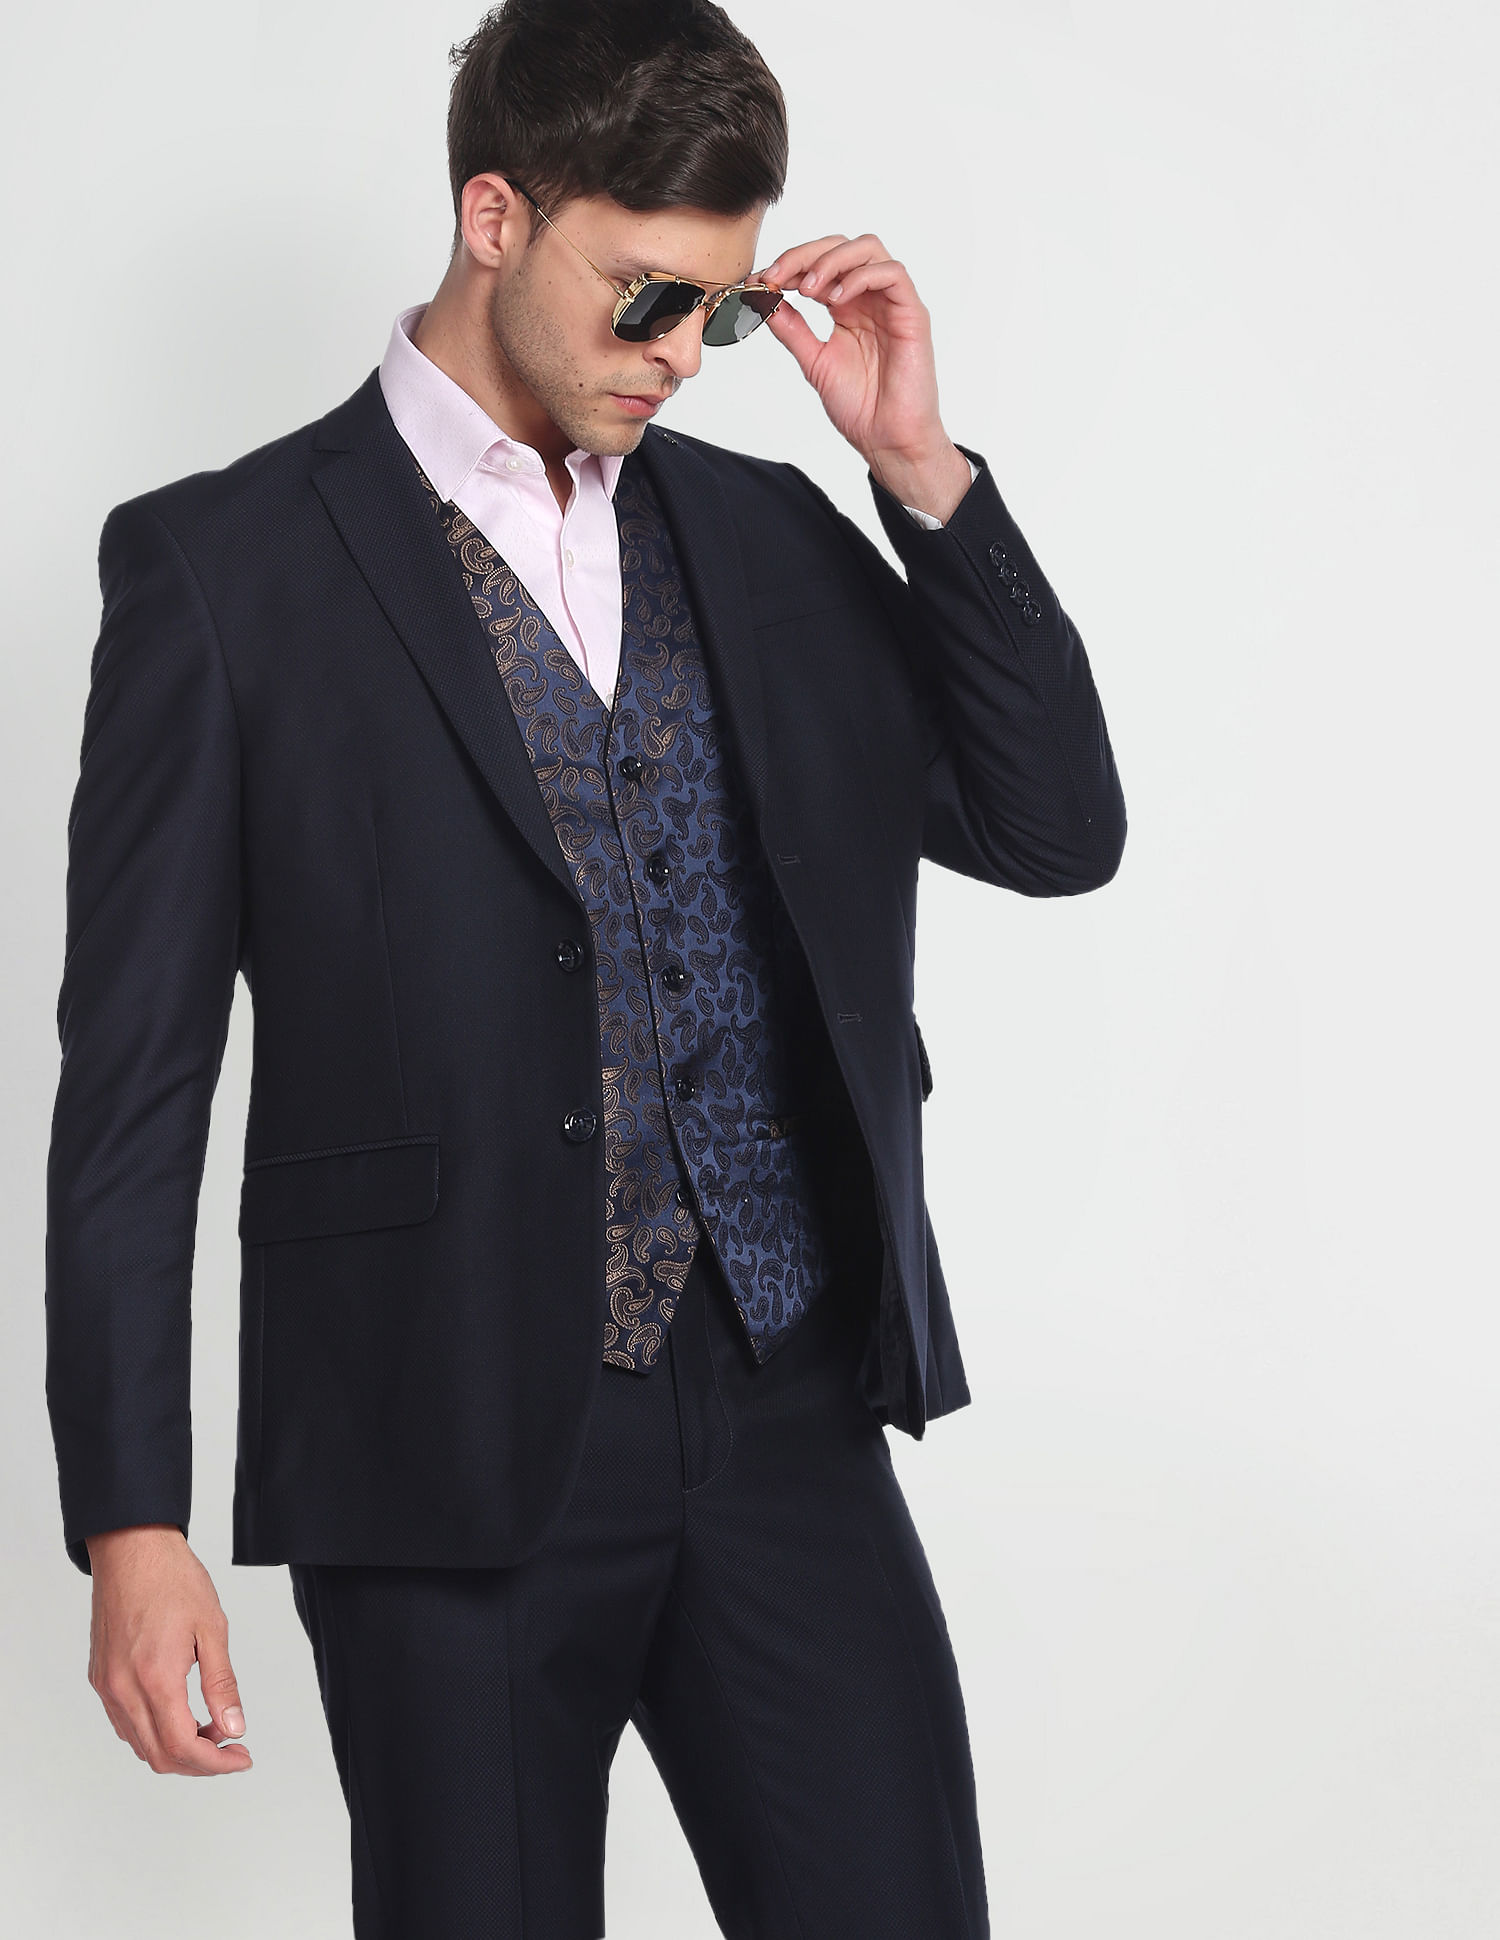 The Gatsby (U-shaped) Waistcoat | Mens fashion suits, Grey suit styling,  Light grey suits